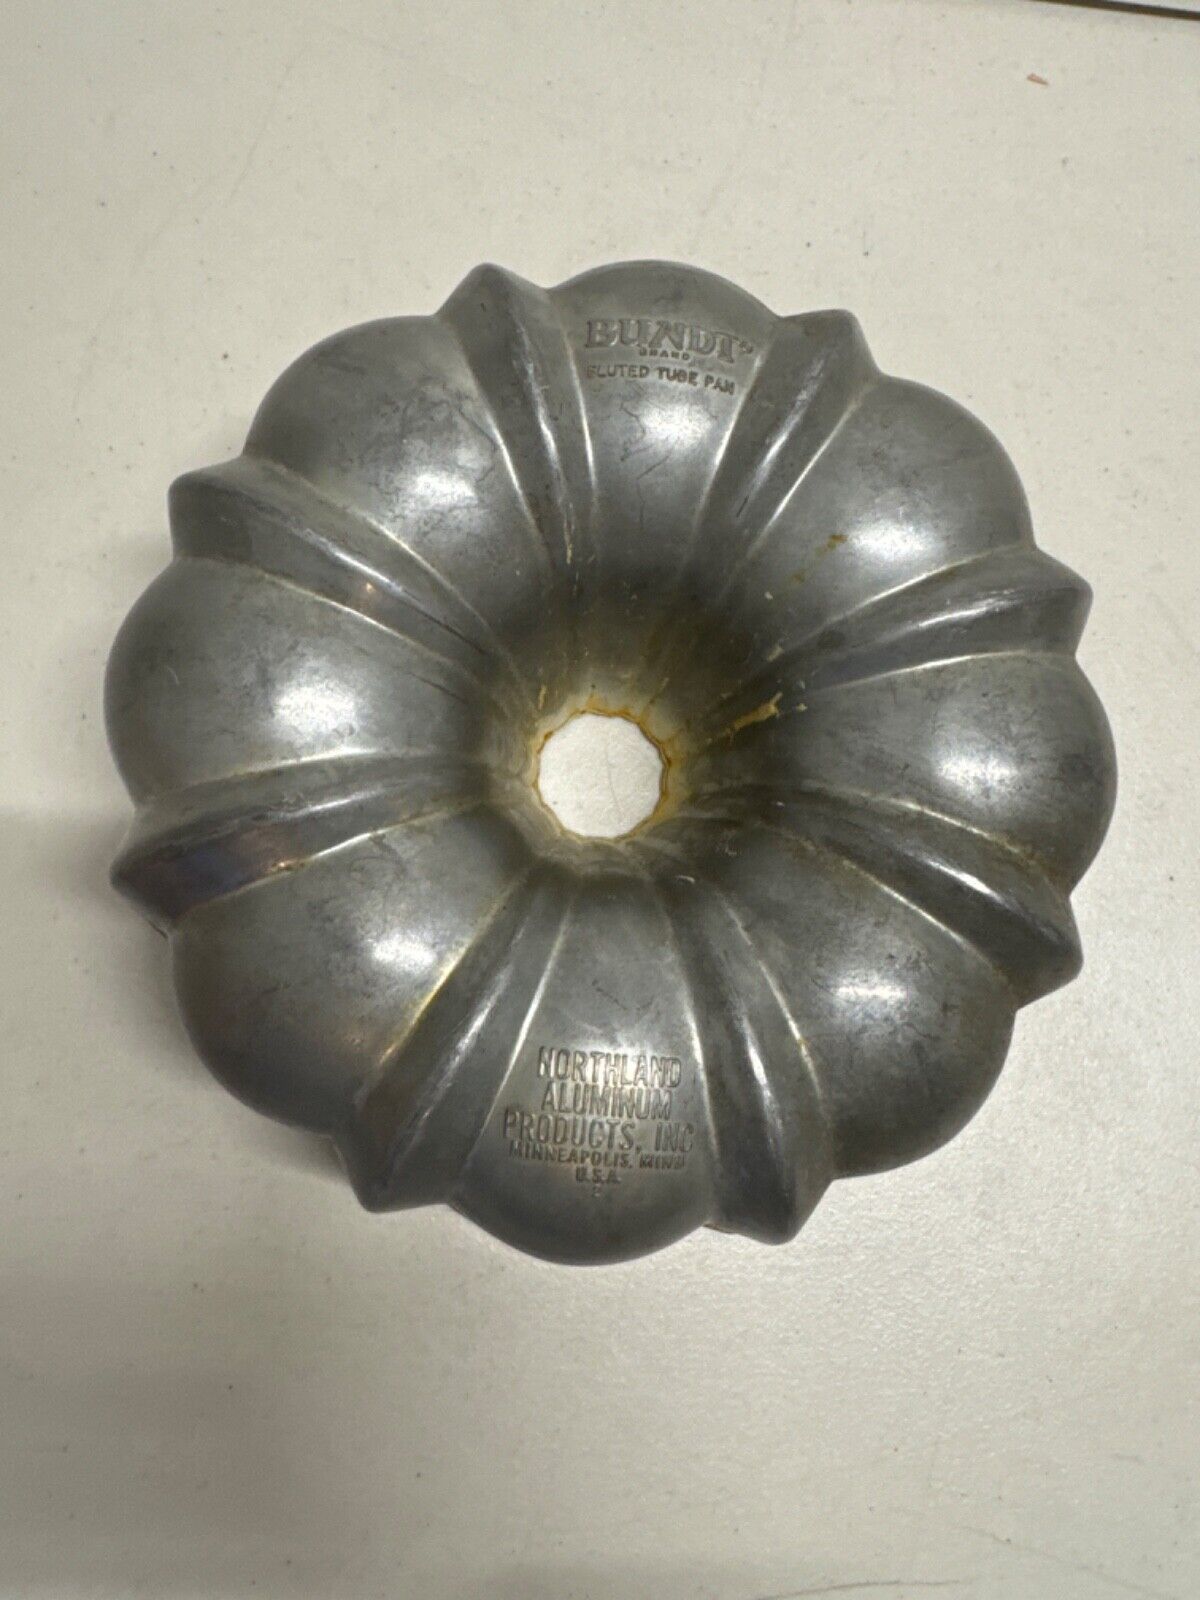 Vintage Bundt Brand Pan, Fluted Tube Pan, Northland Aluminum Products Heavy Duty